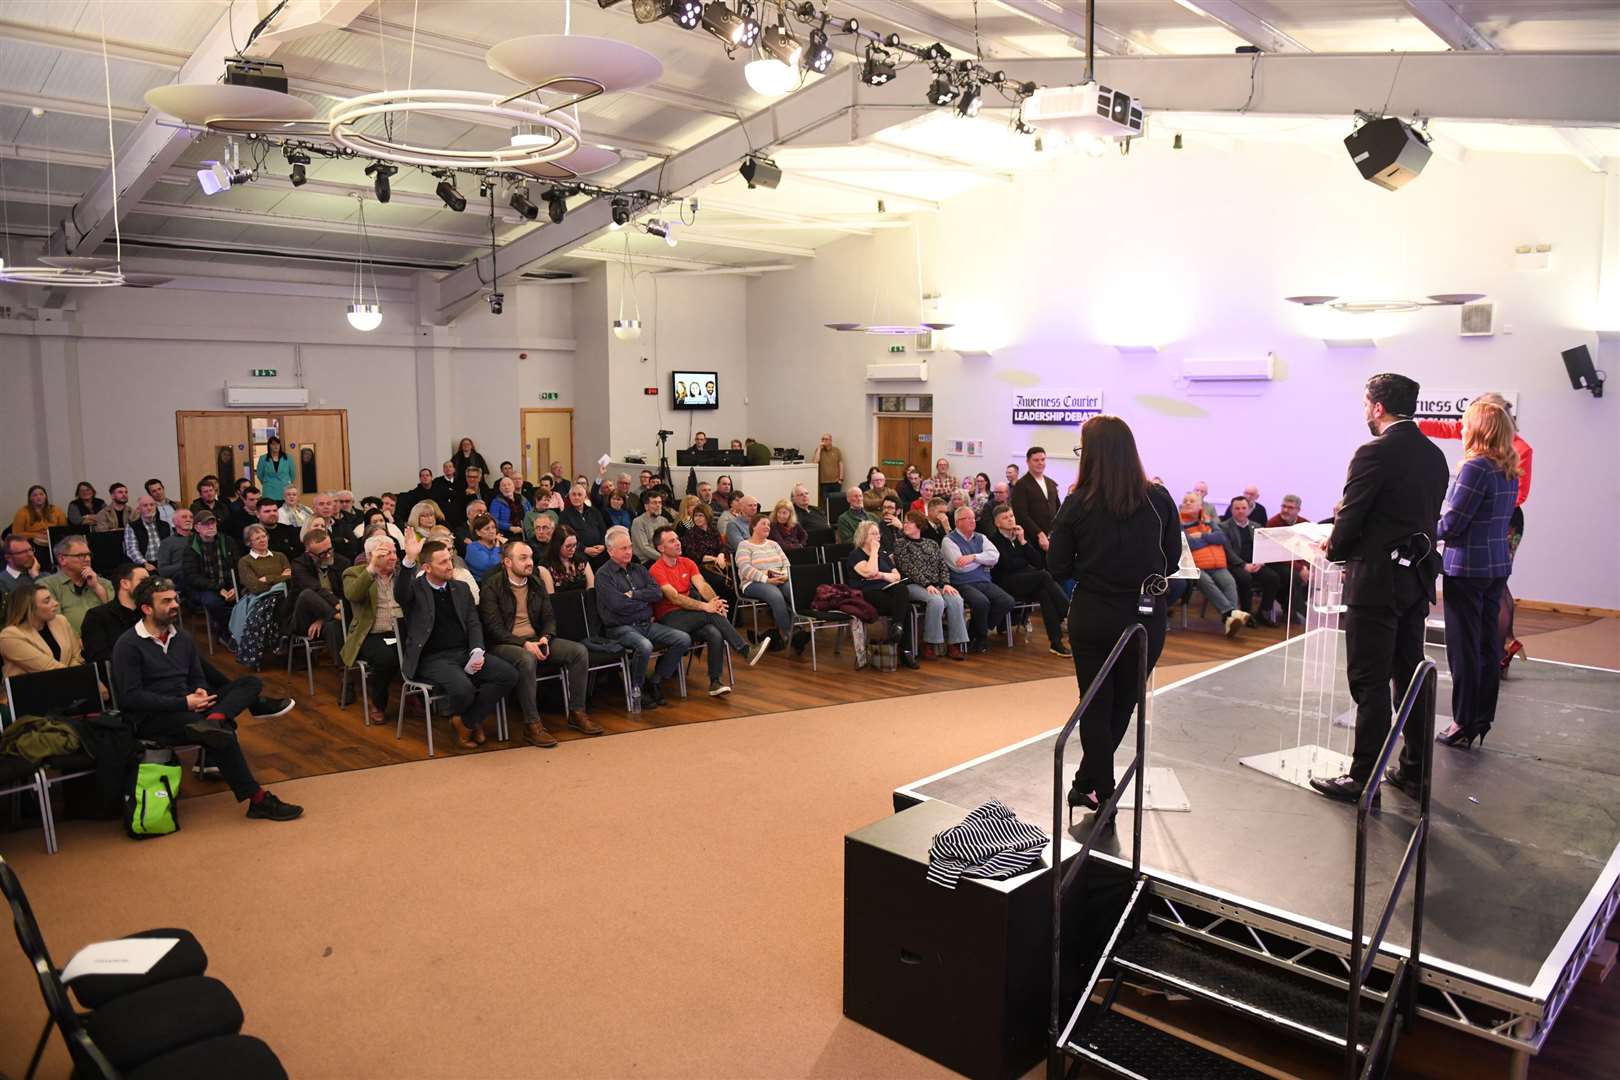 The three leadership candidates in front of the audience. Picture: James Mackenzie.